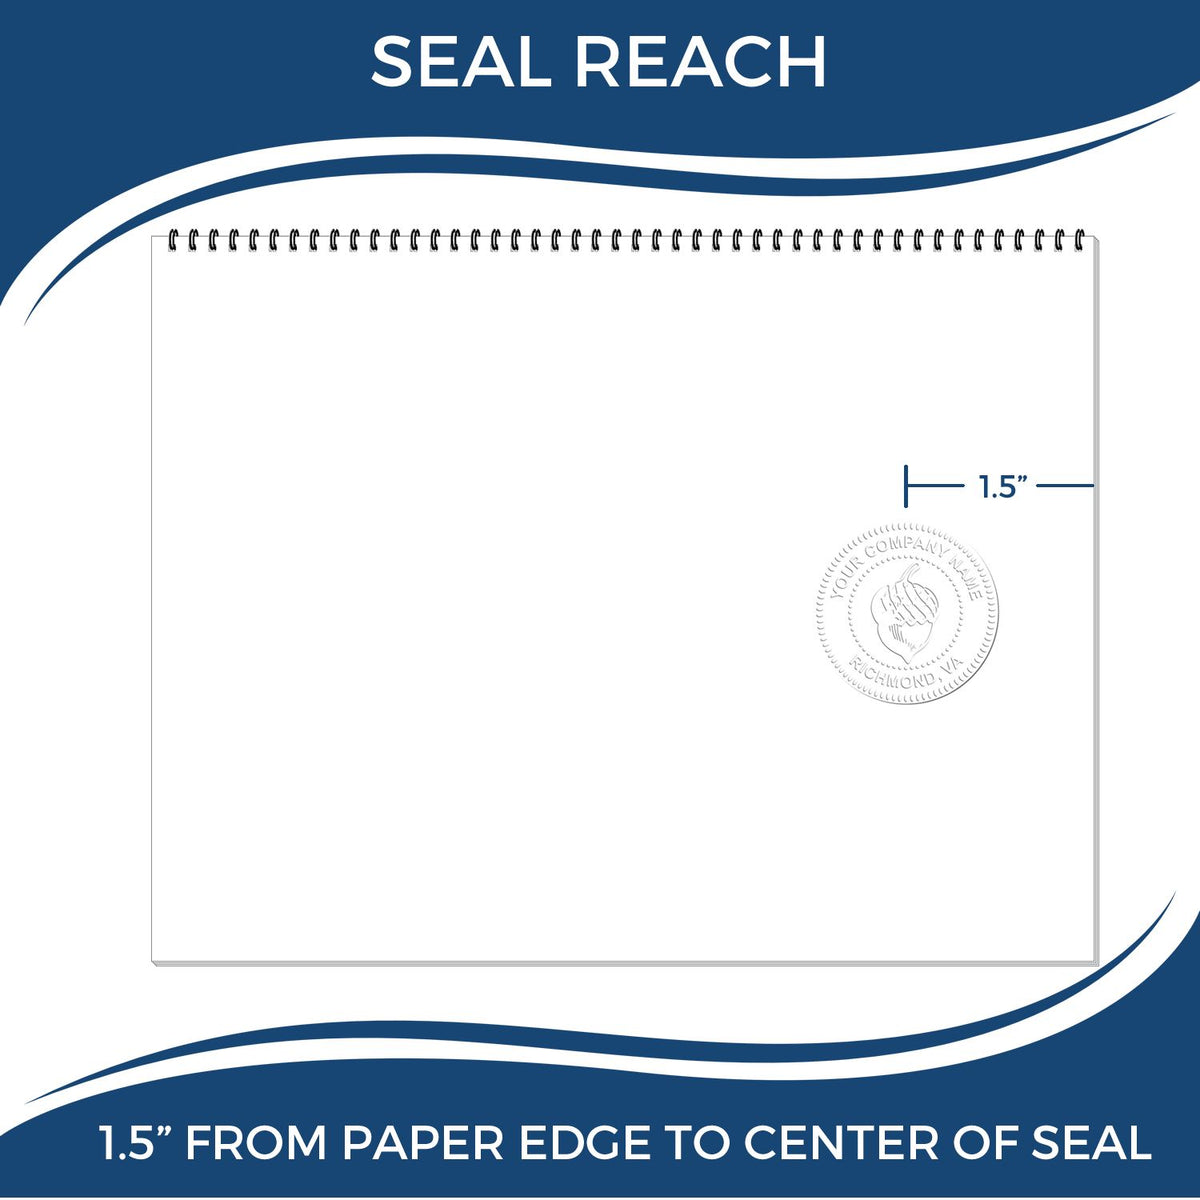 An infographic showing the seal reach which is represented by a ruler and a miniature seal image of the Handheld Wyoming Professional Engineer Embosser